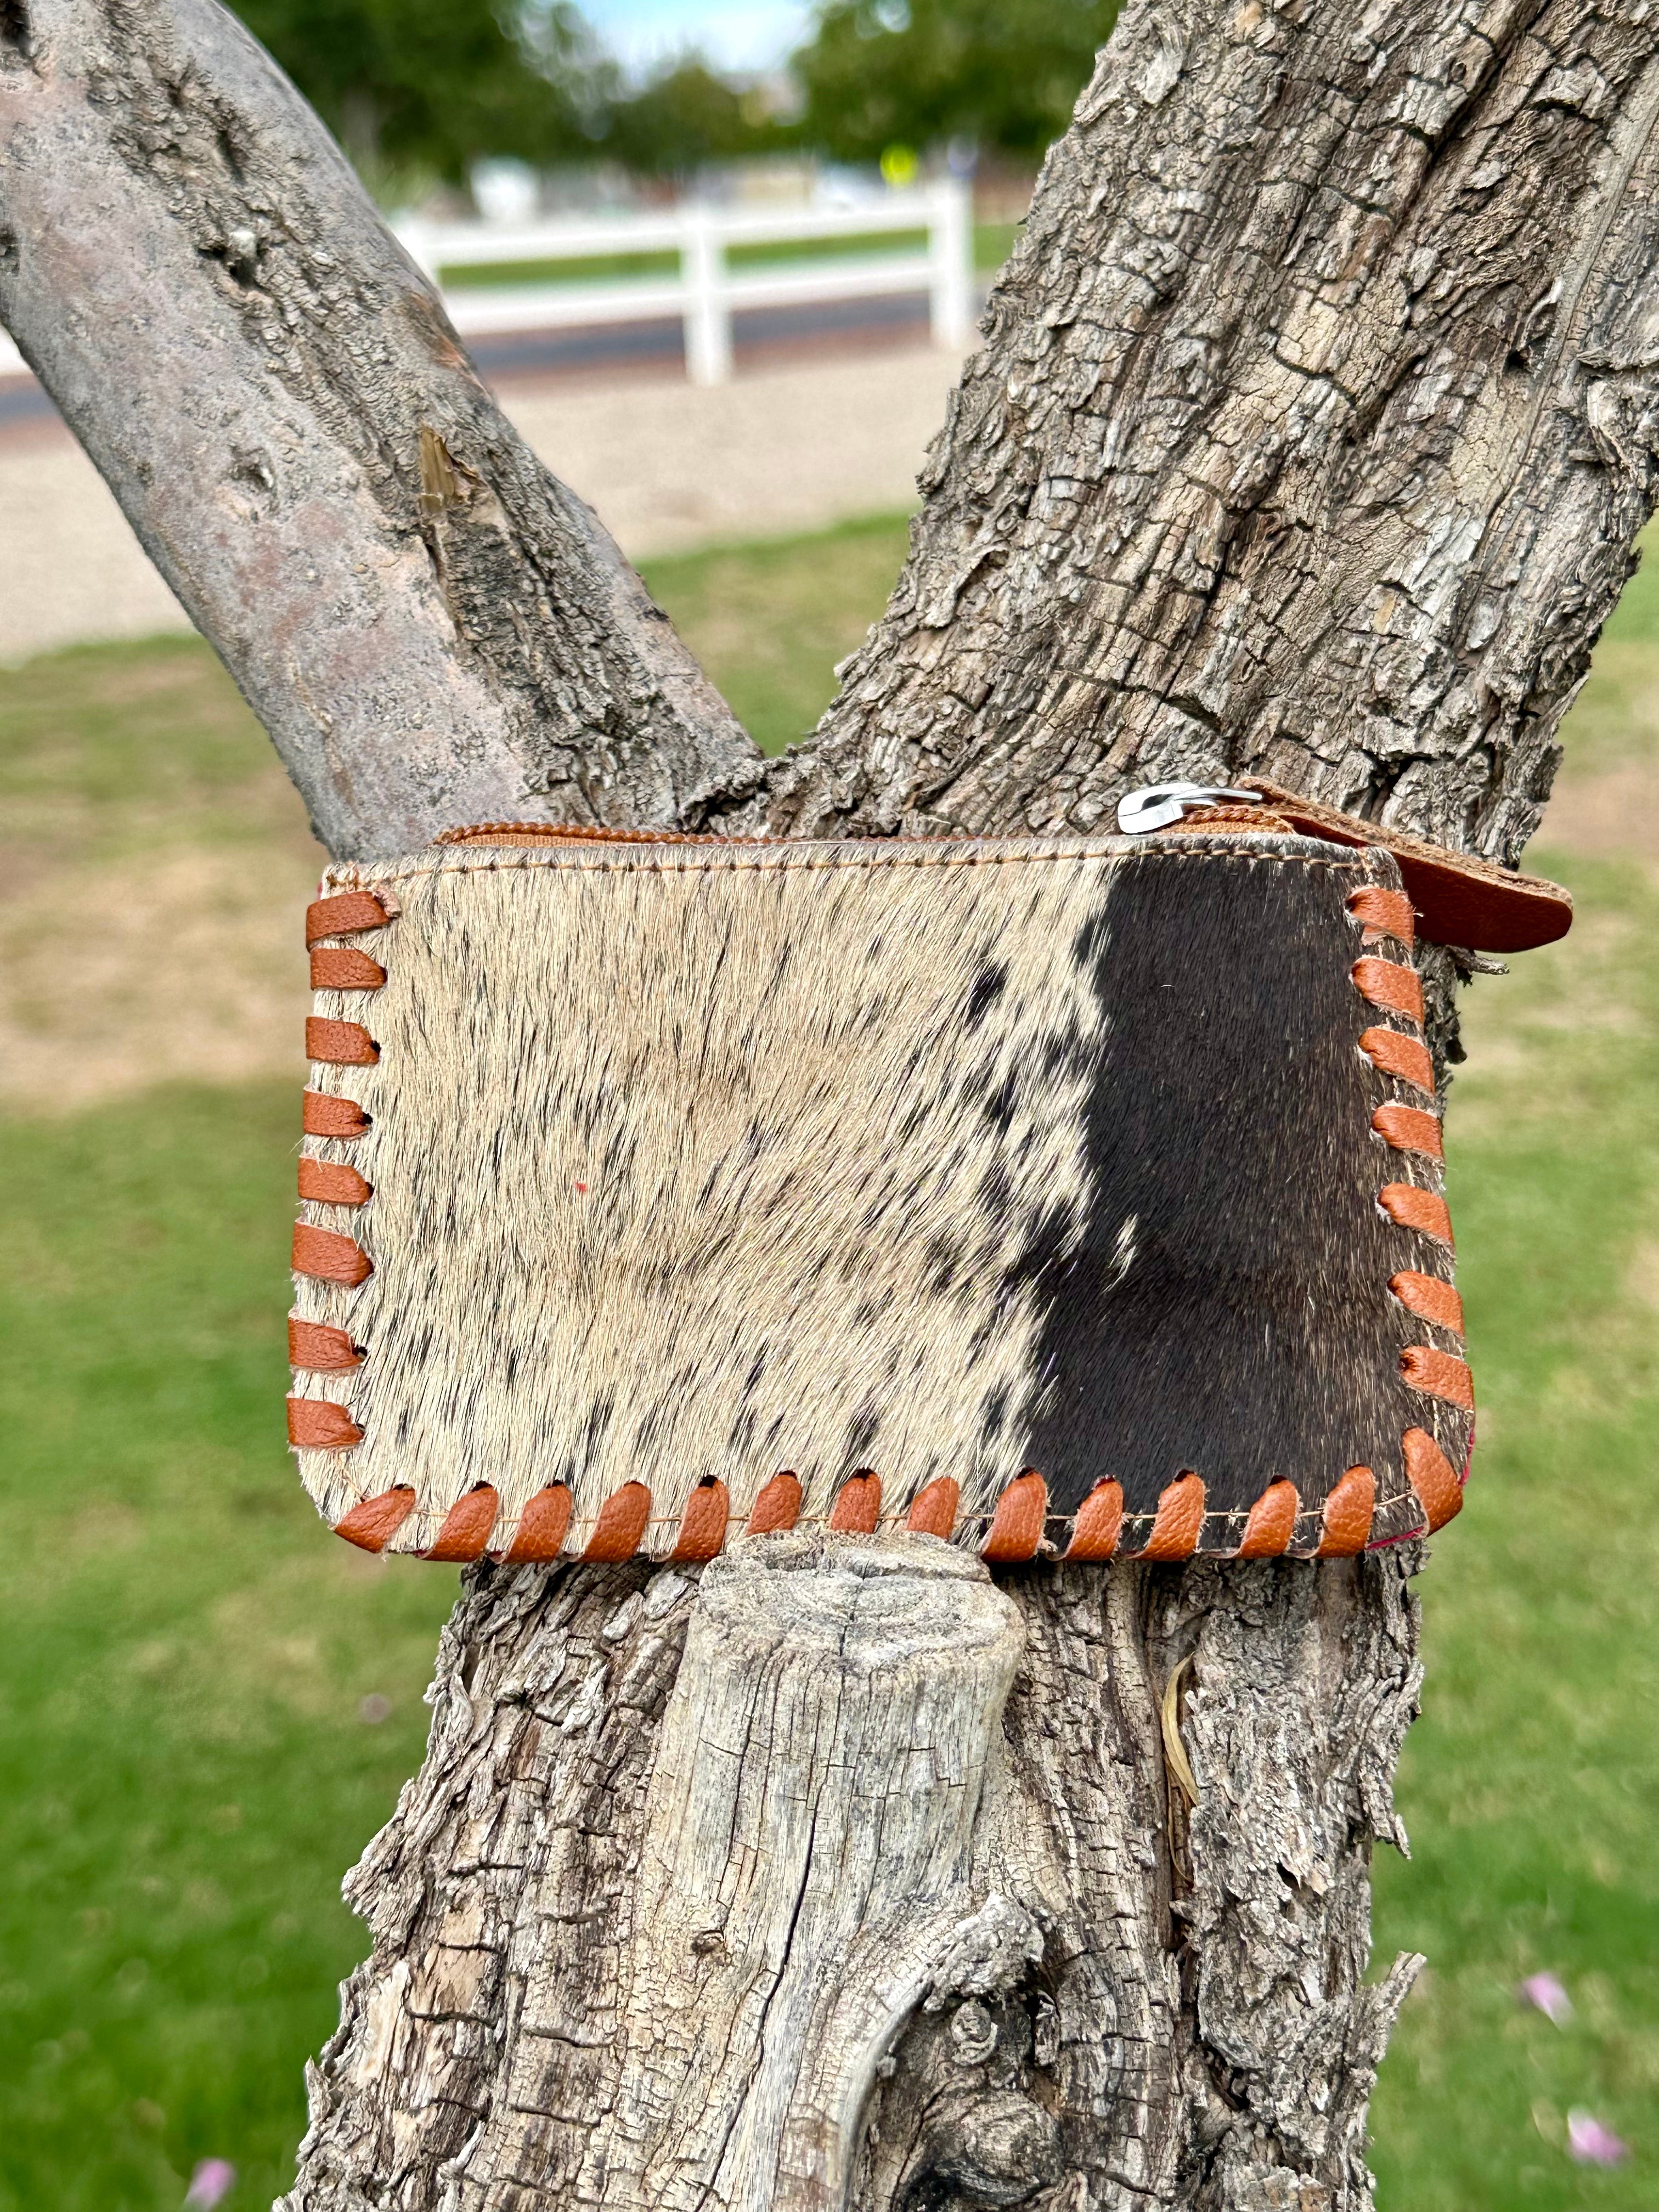 Genuine Tooled Leather Cowhide Coin Bag